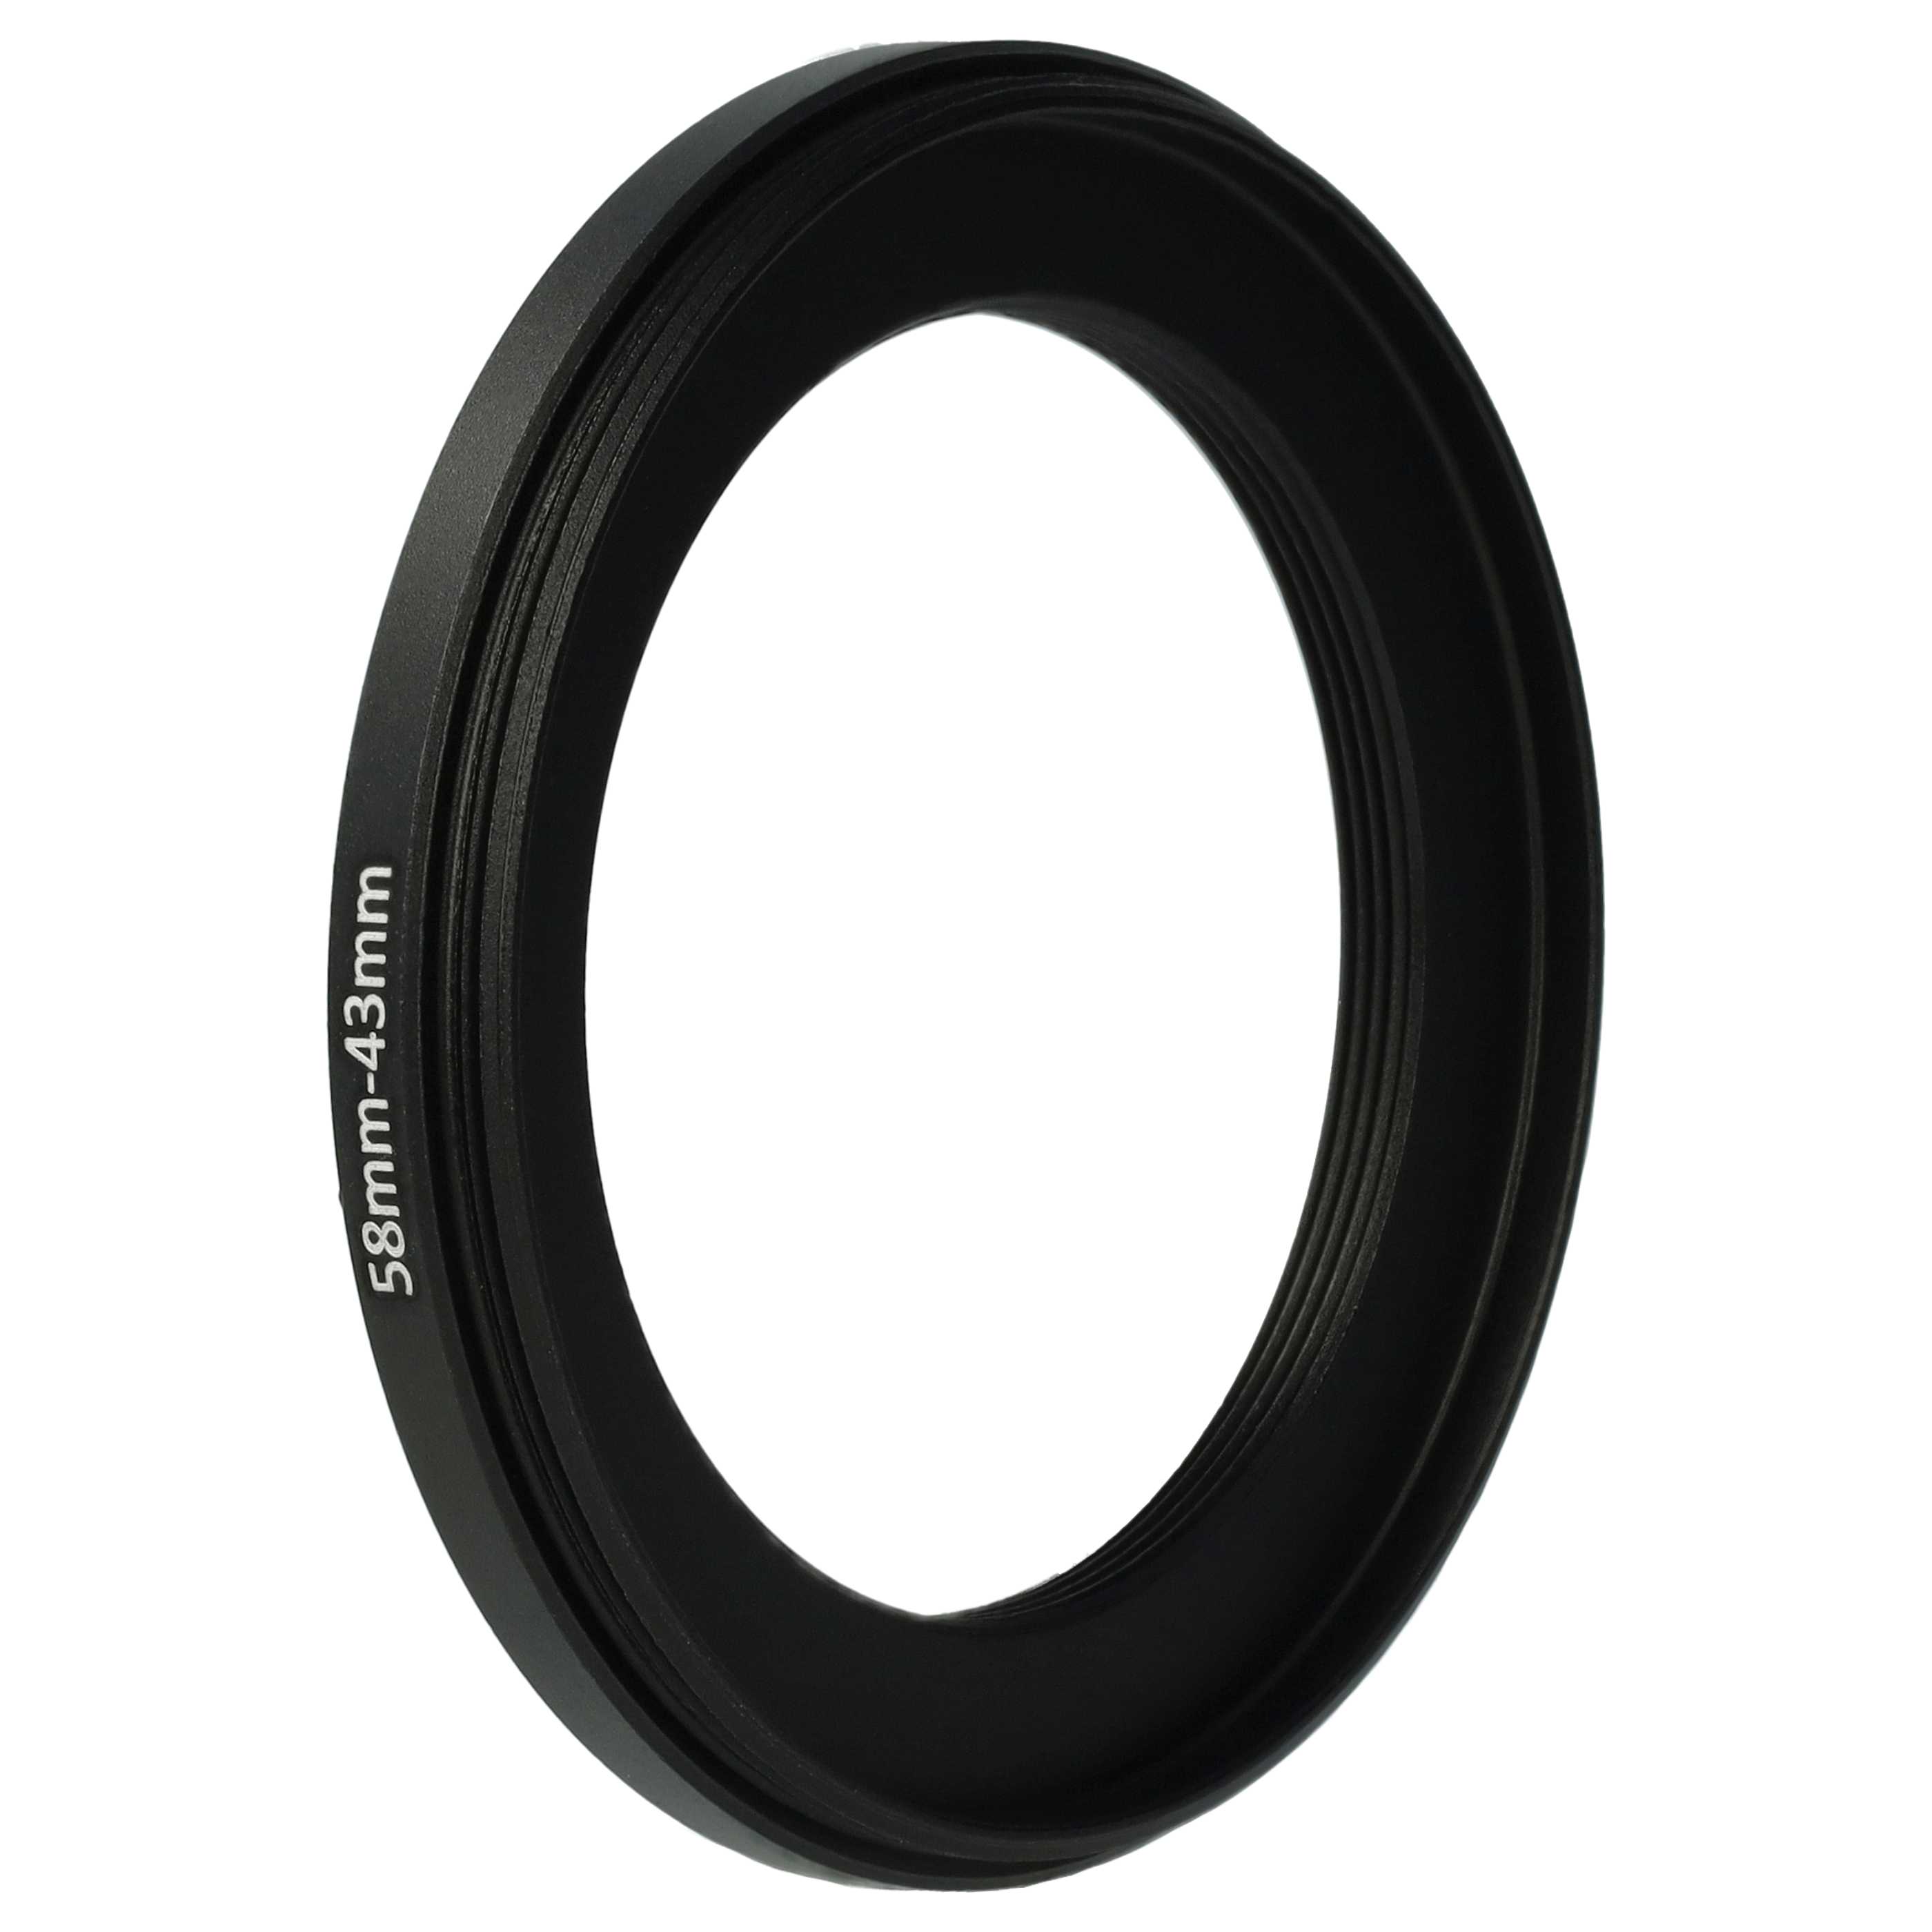 Step-Down Ring Adapter from 58 mm to 43 mm suitable for Camera Lens - Filter Adapter, metal